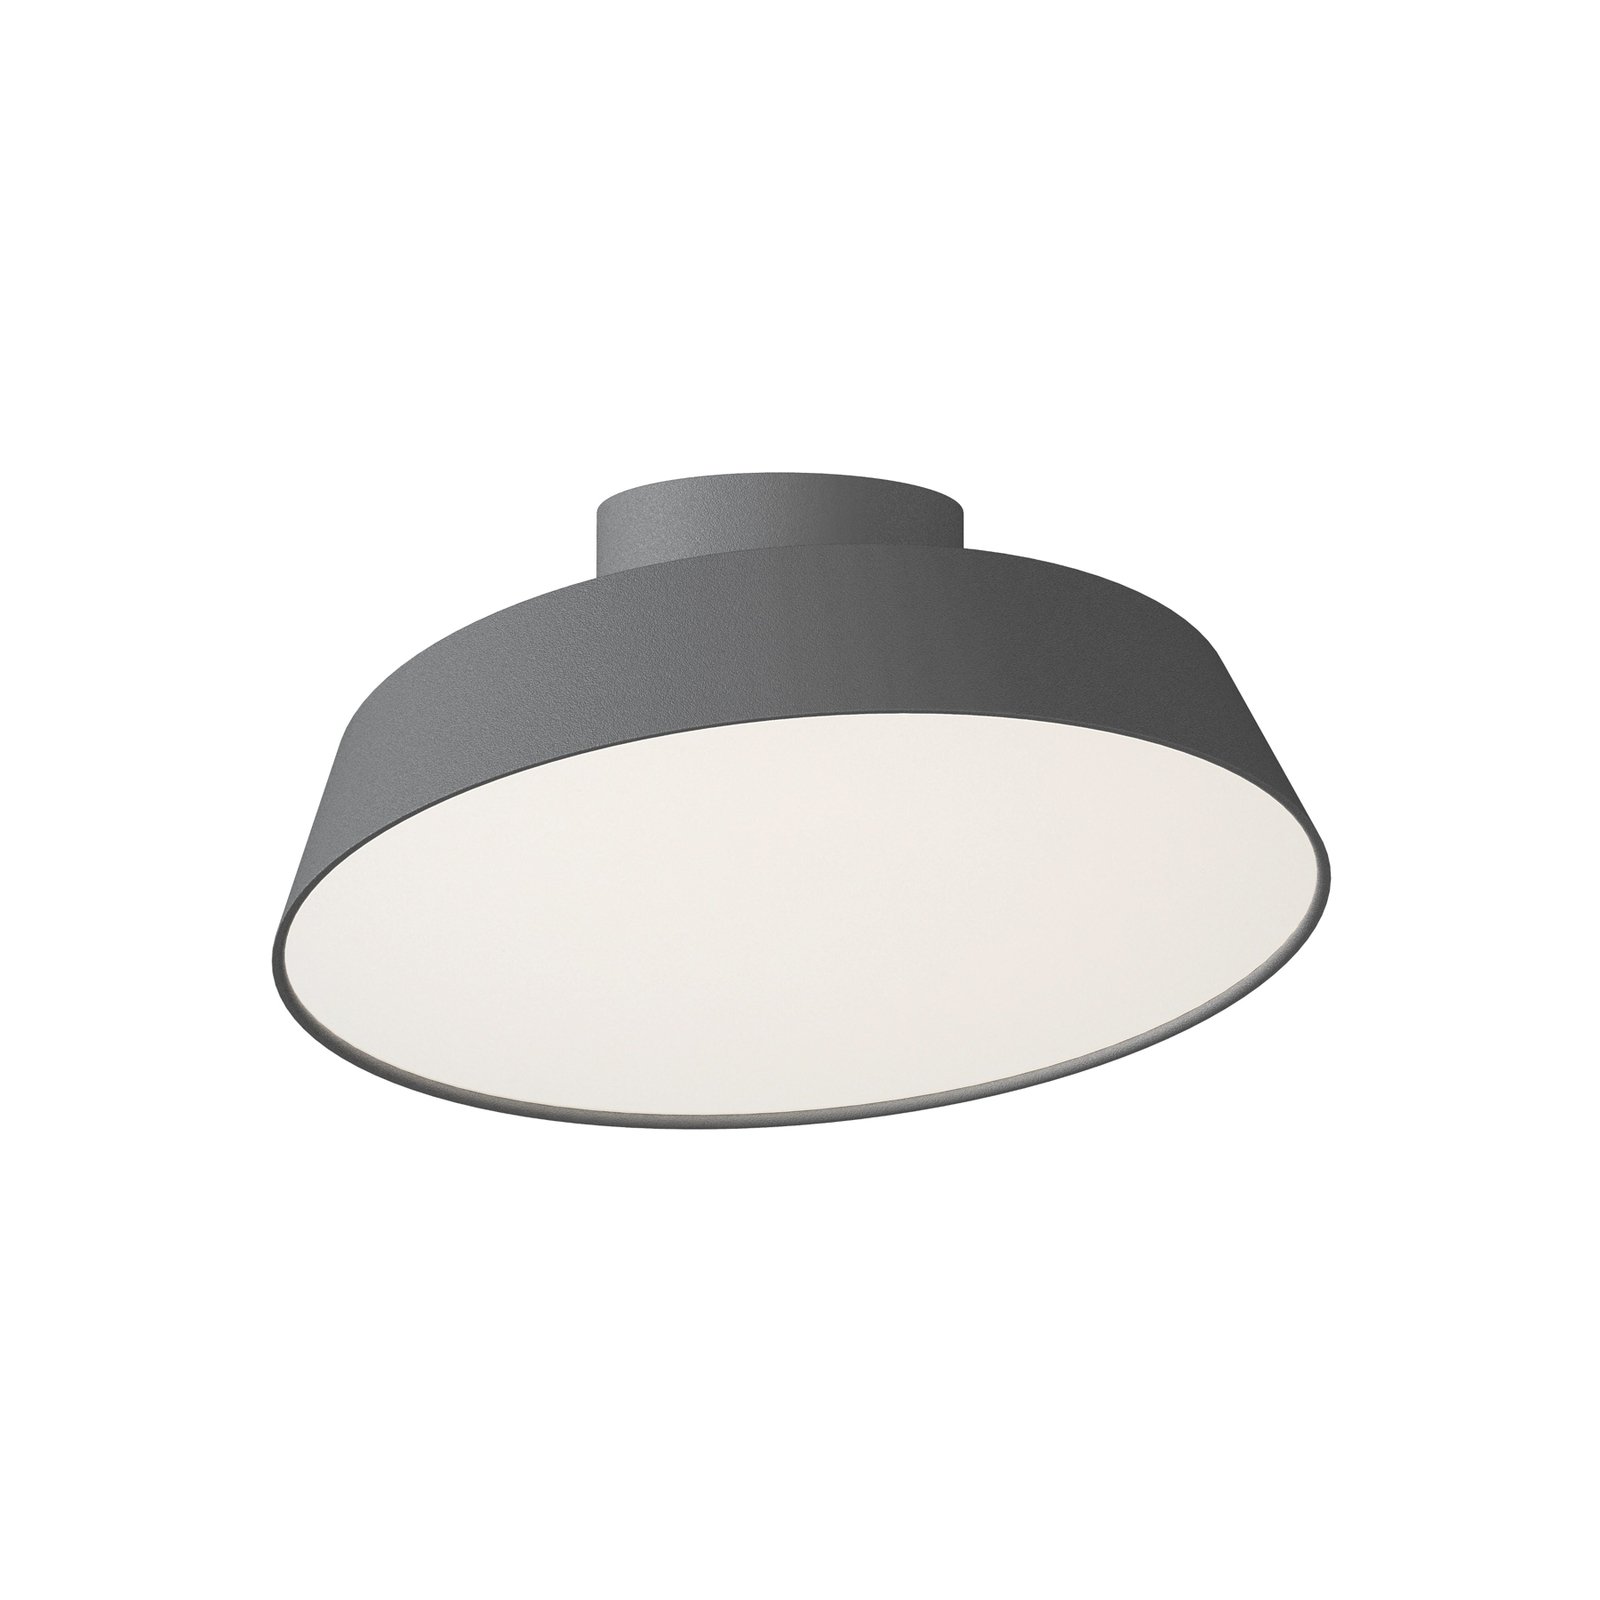 LED ceiling light Kaito 2 Dim, grey, Ø 30 cm, dimmable